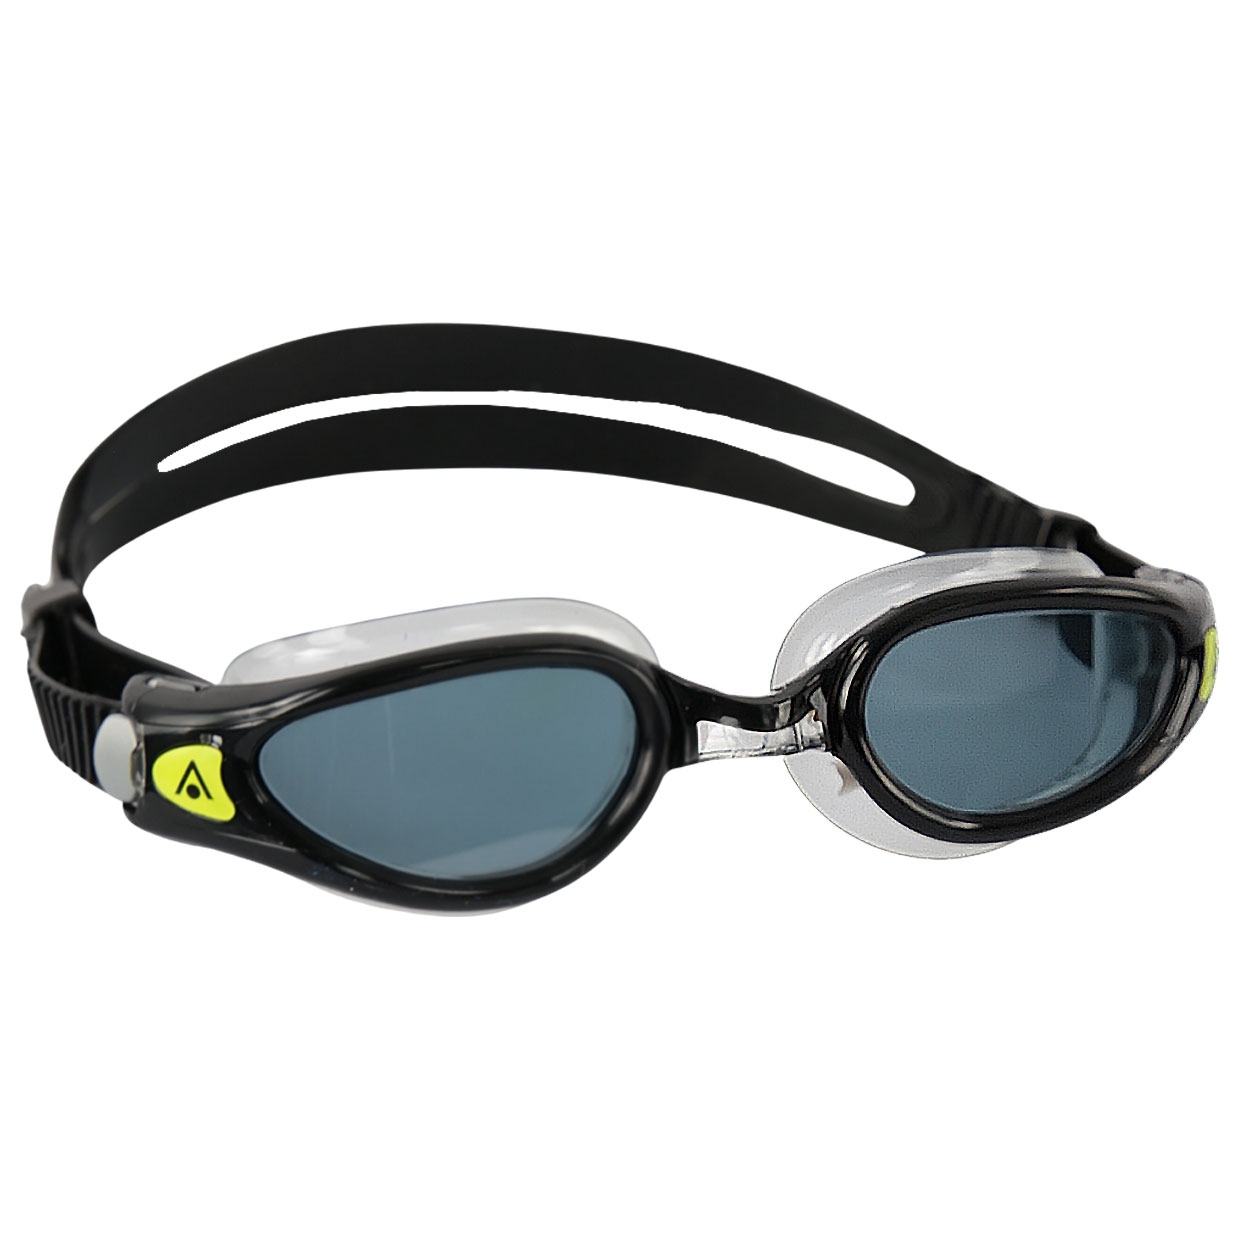 Schwimmbrille Kaiman Exo Advanced Fit